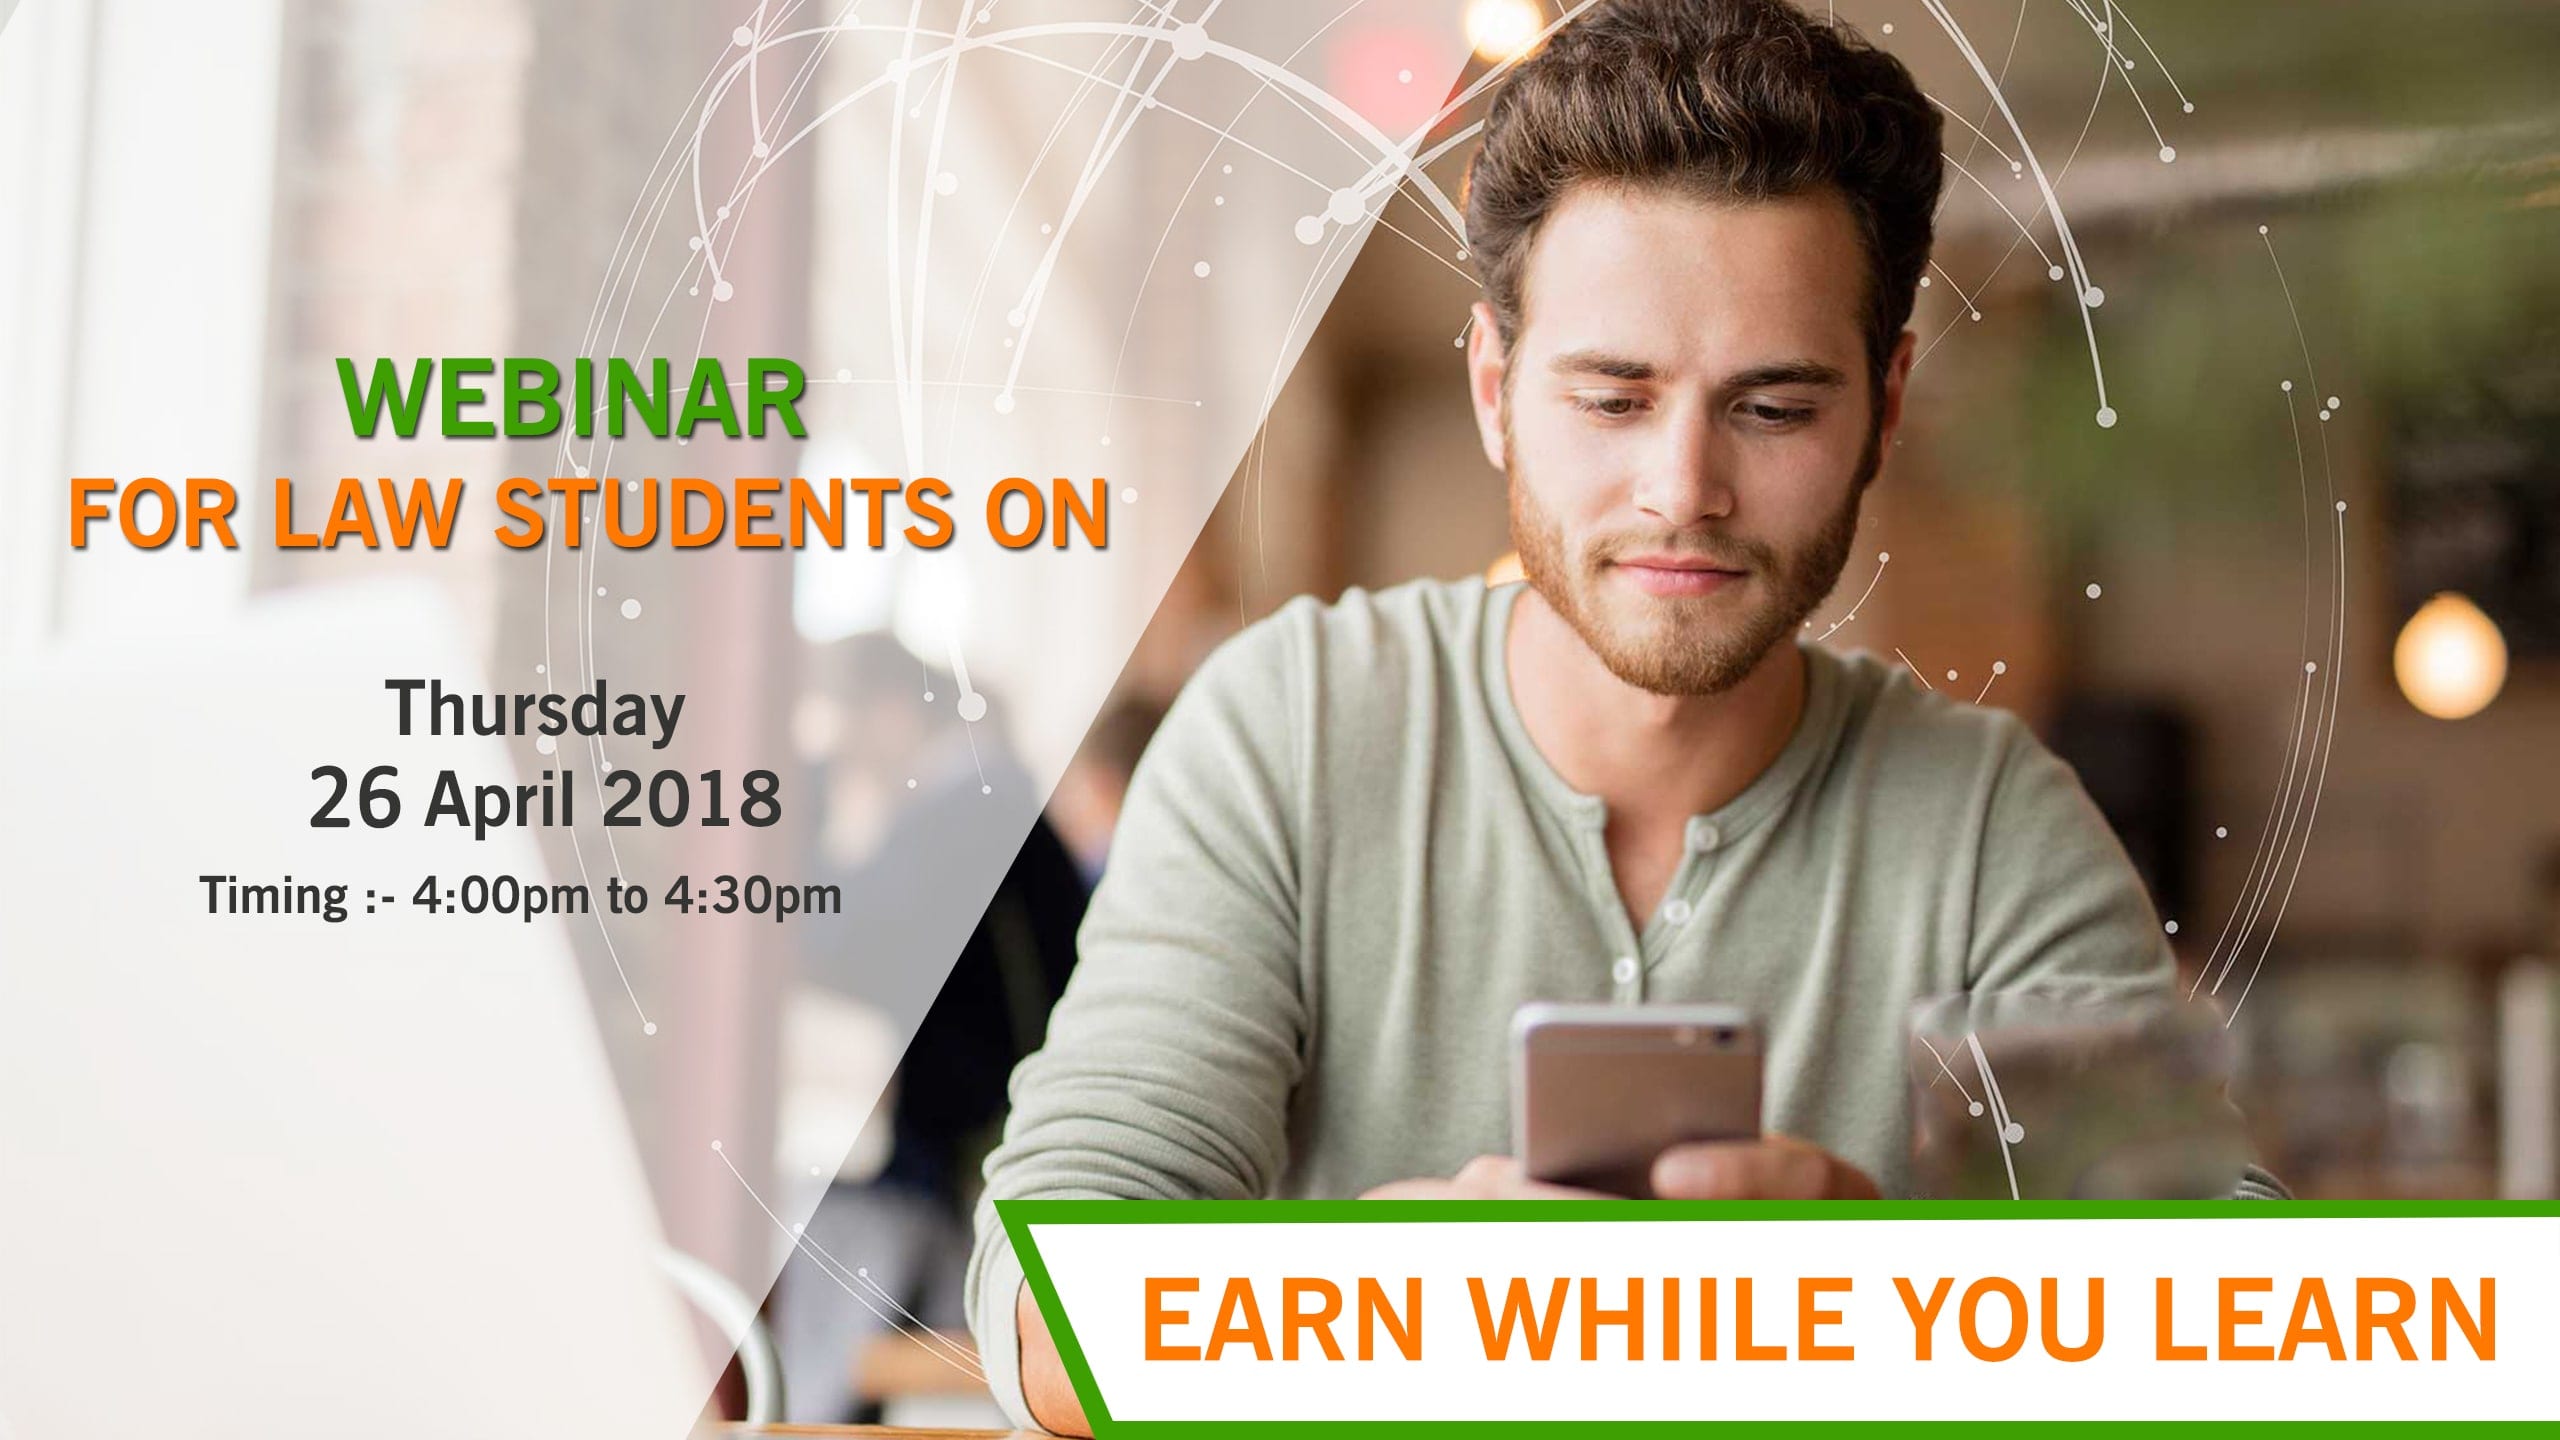 Webinar for Law students on Earn While You Learn